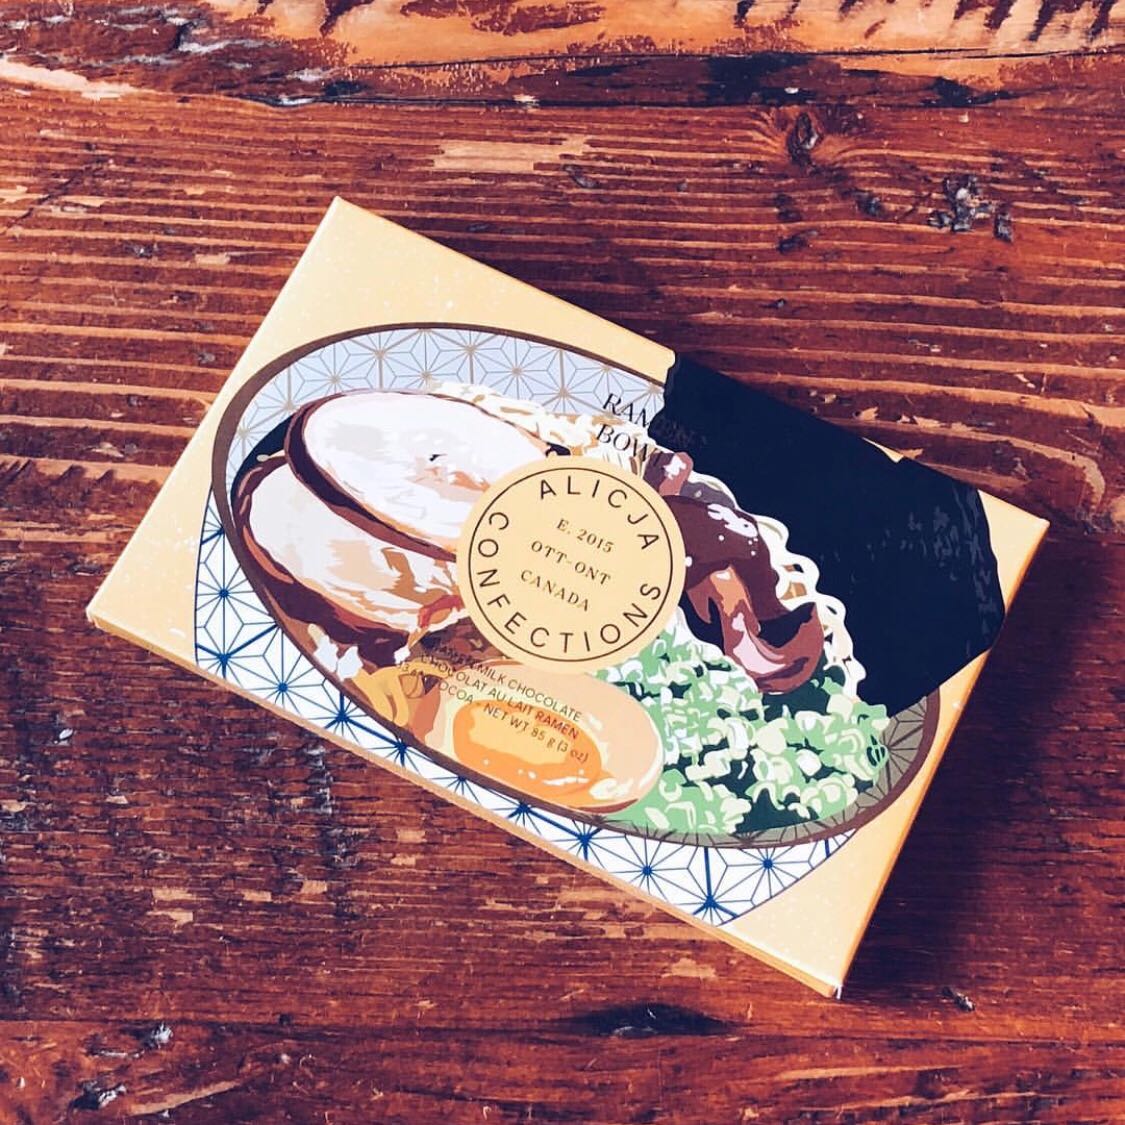 The Ramen Bowl bar from Alicja Confections.